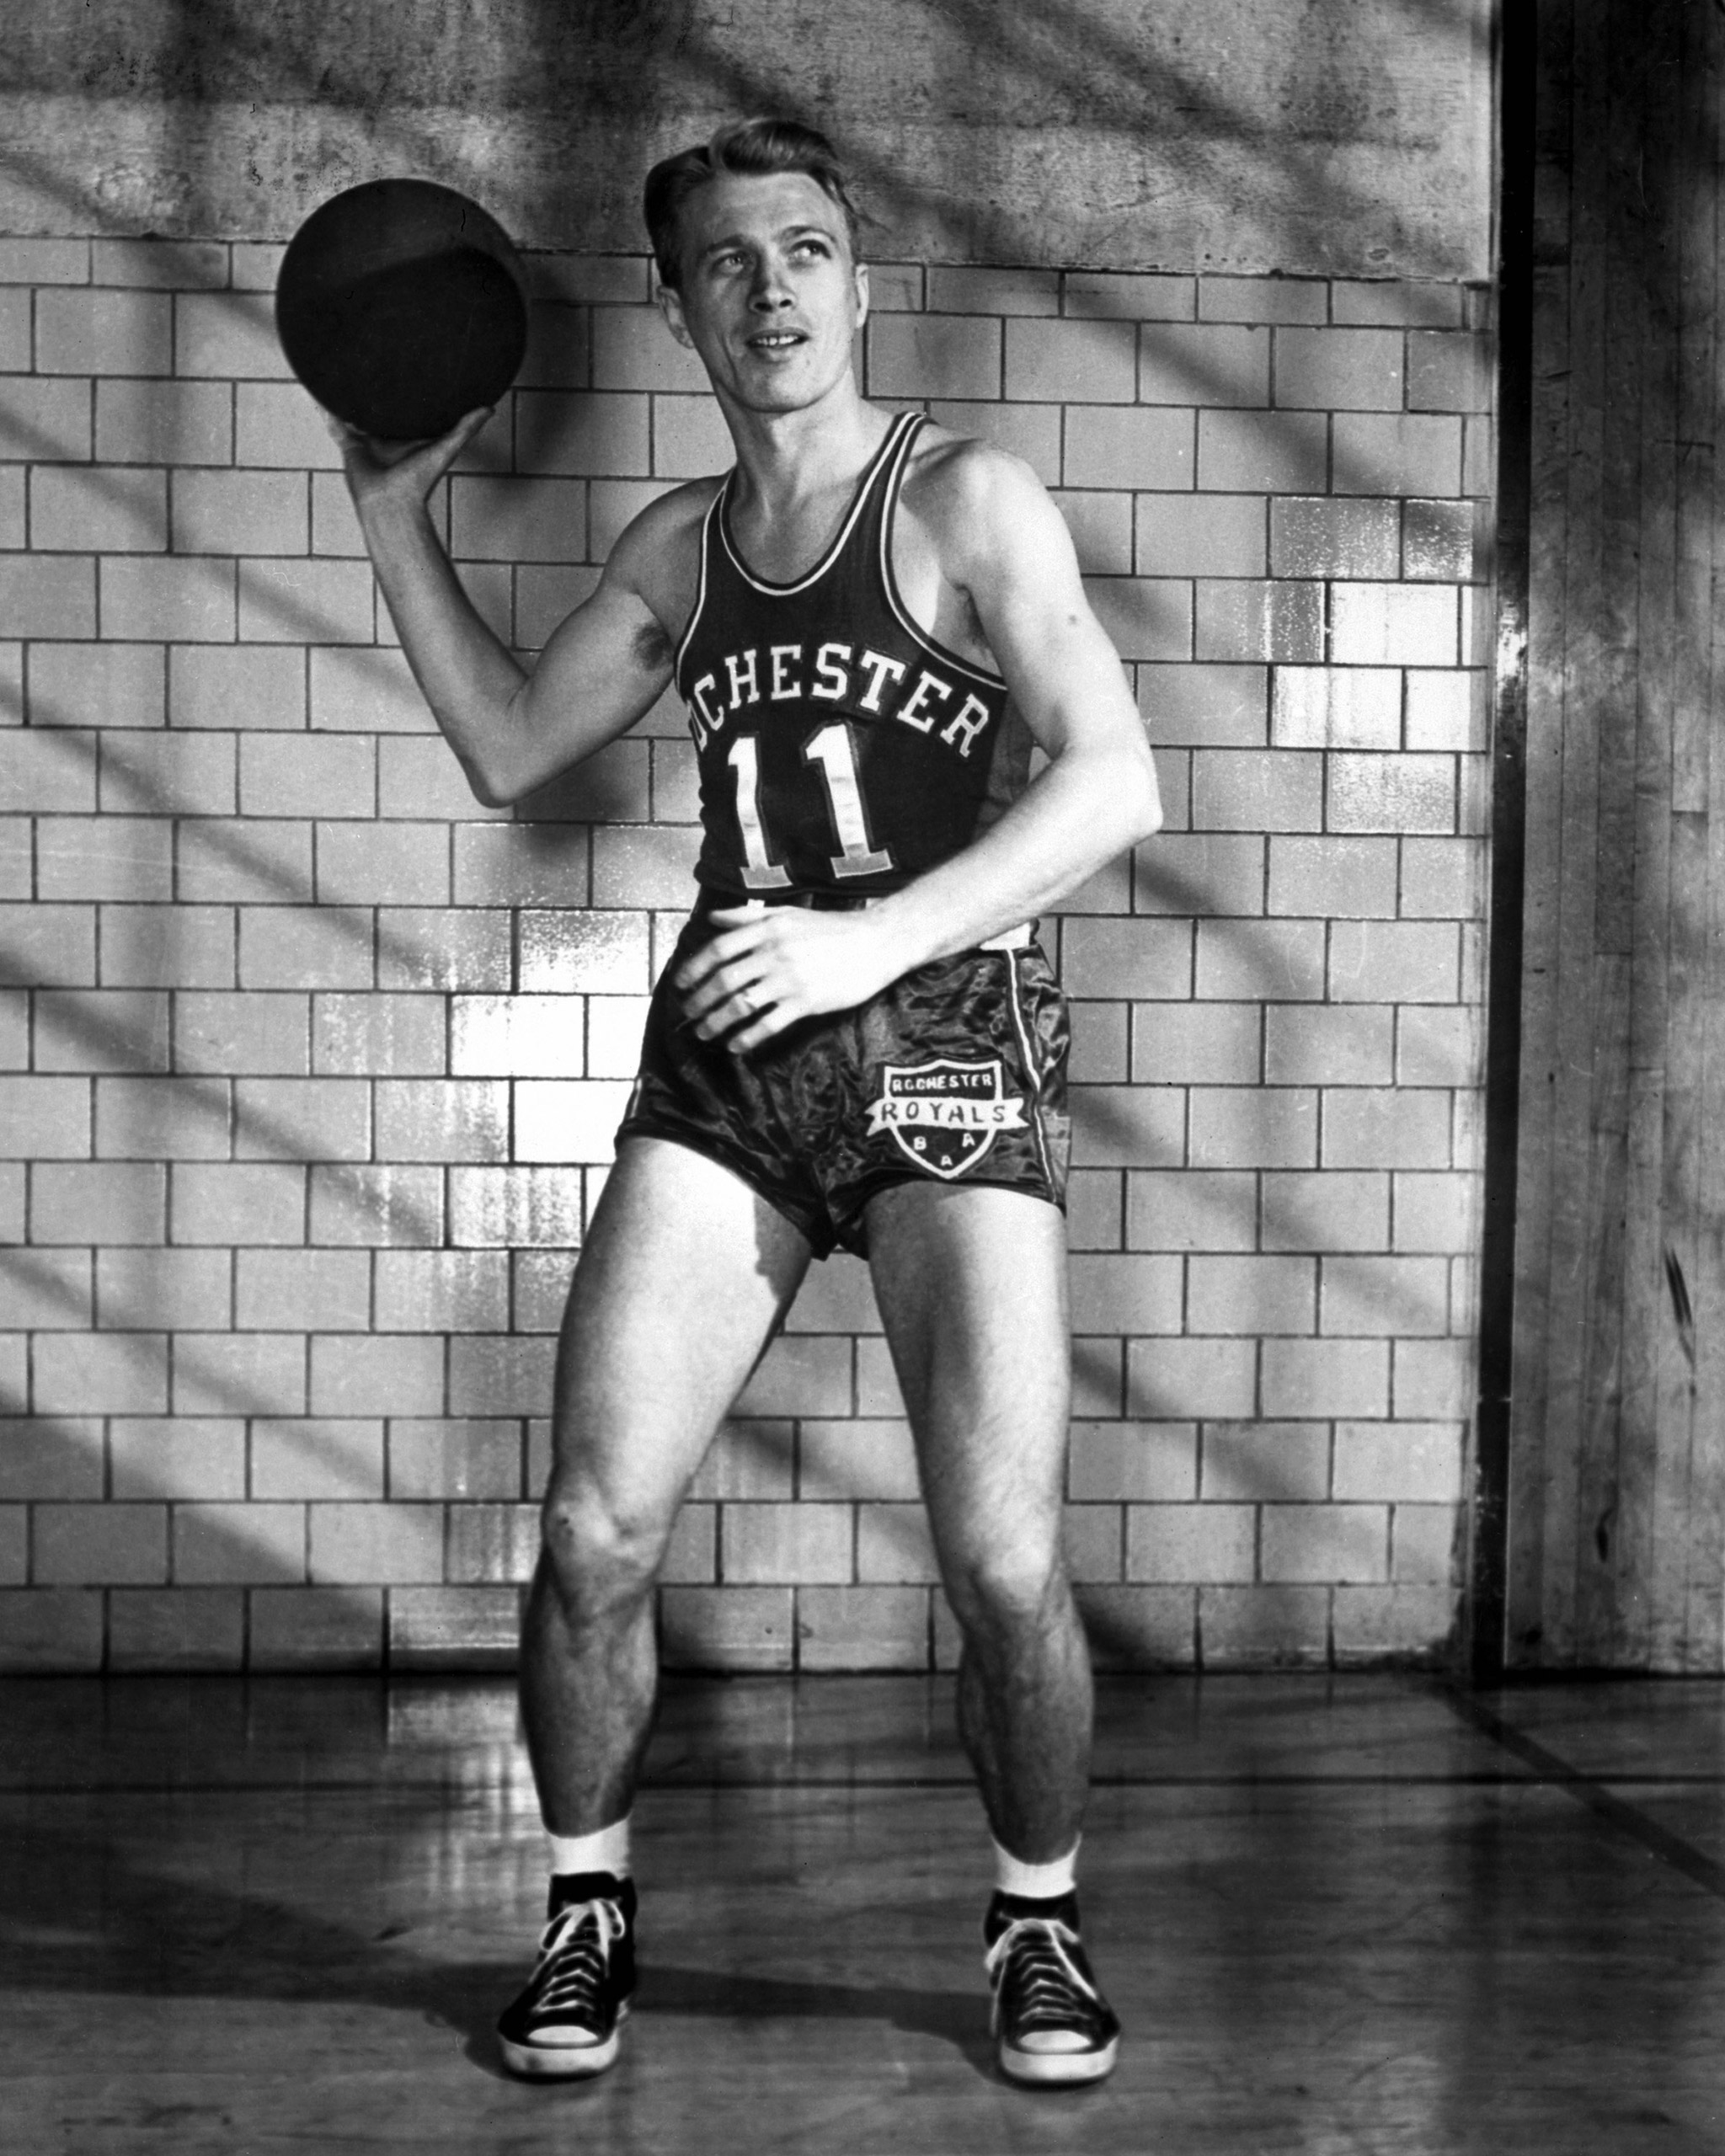 Bob Davies of the Rochester Royals poses for an action portrait during the 1946 season in Rochester, New York.